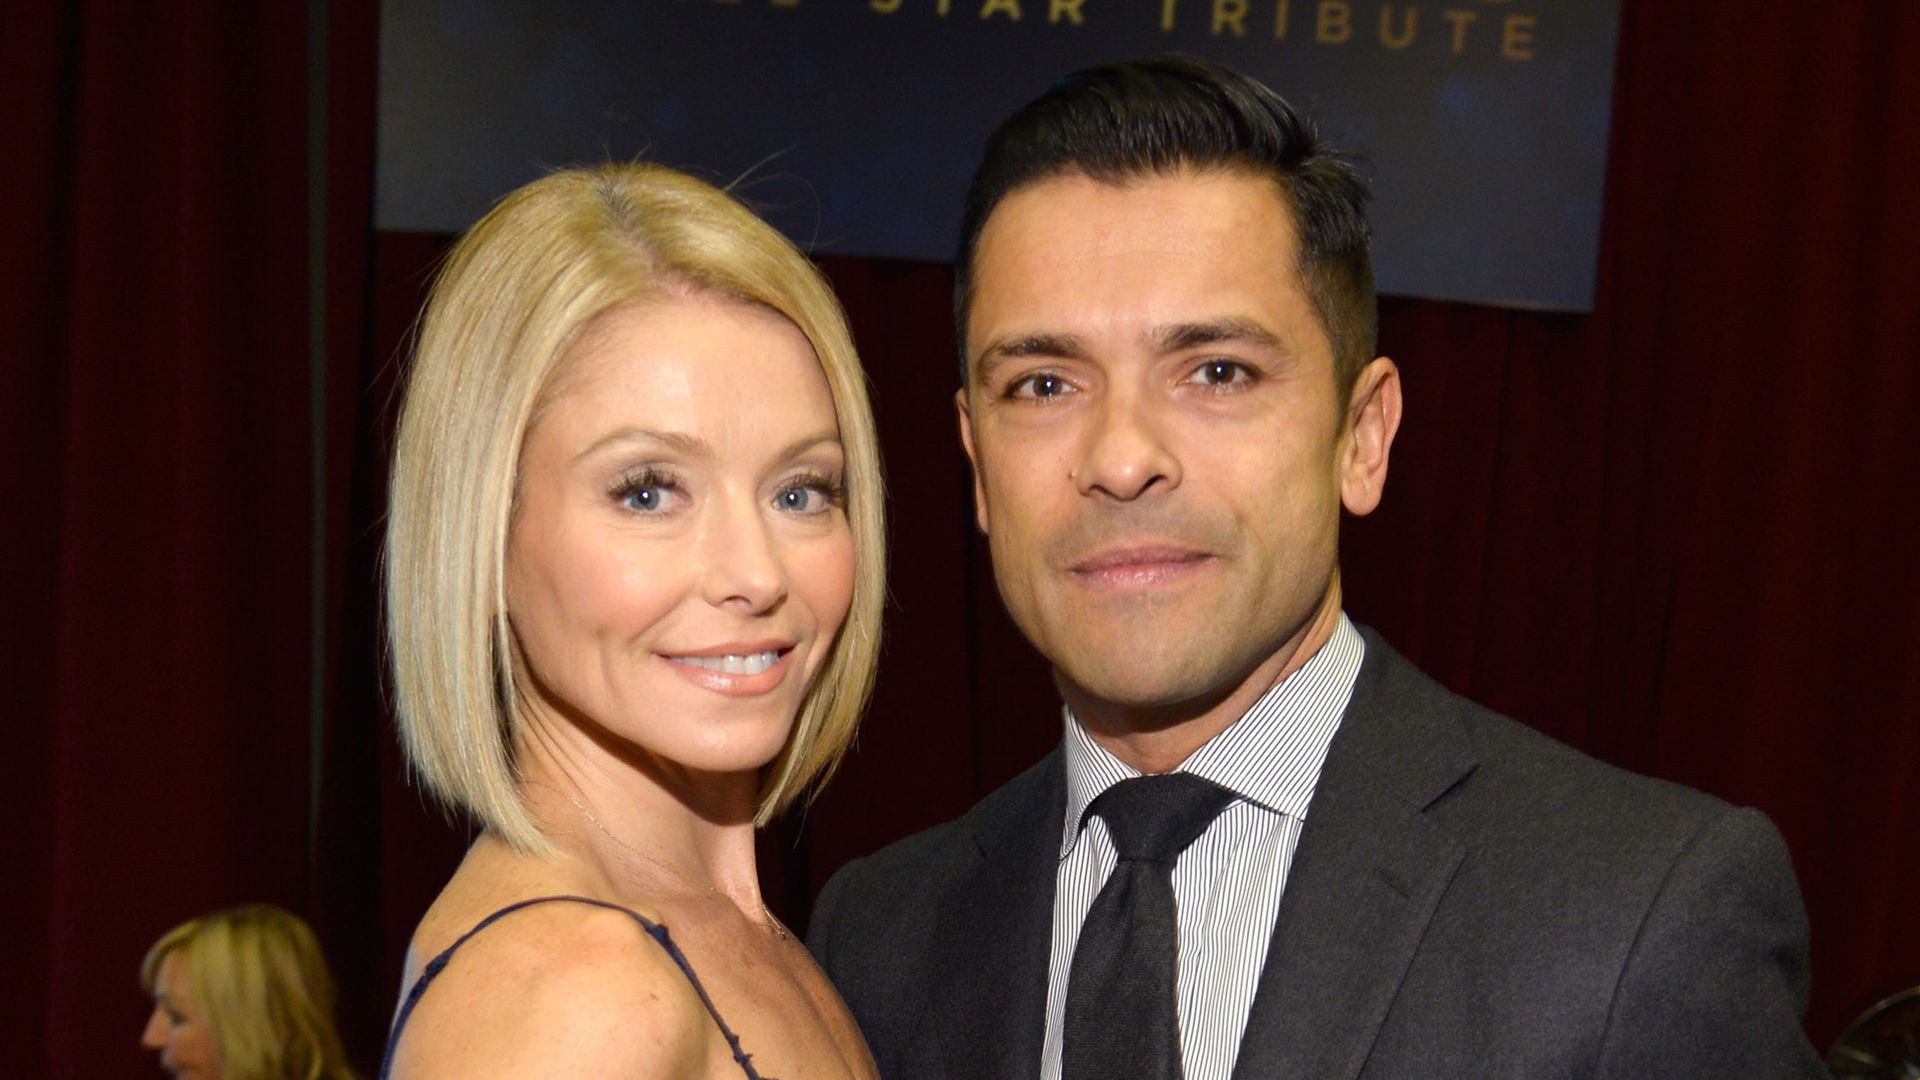 Kelly Ripa and Mark Consuelos backstage during the 2014 CNN Heroes: An All Star Tribute at American Museum of Natural History on November 18, 2014 in New York City